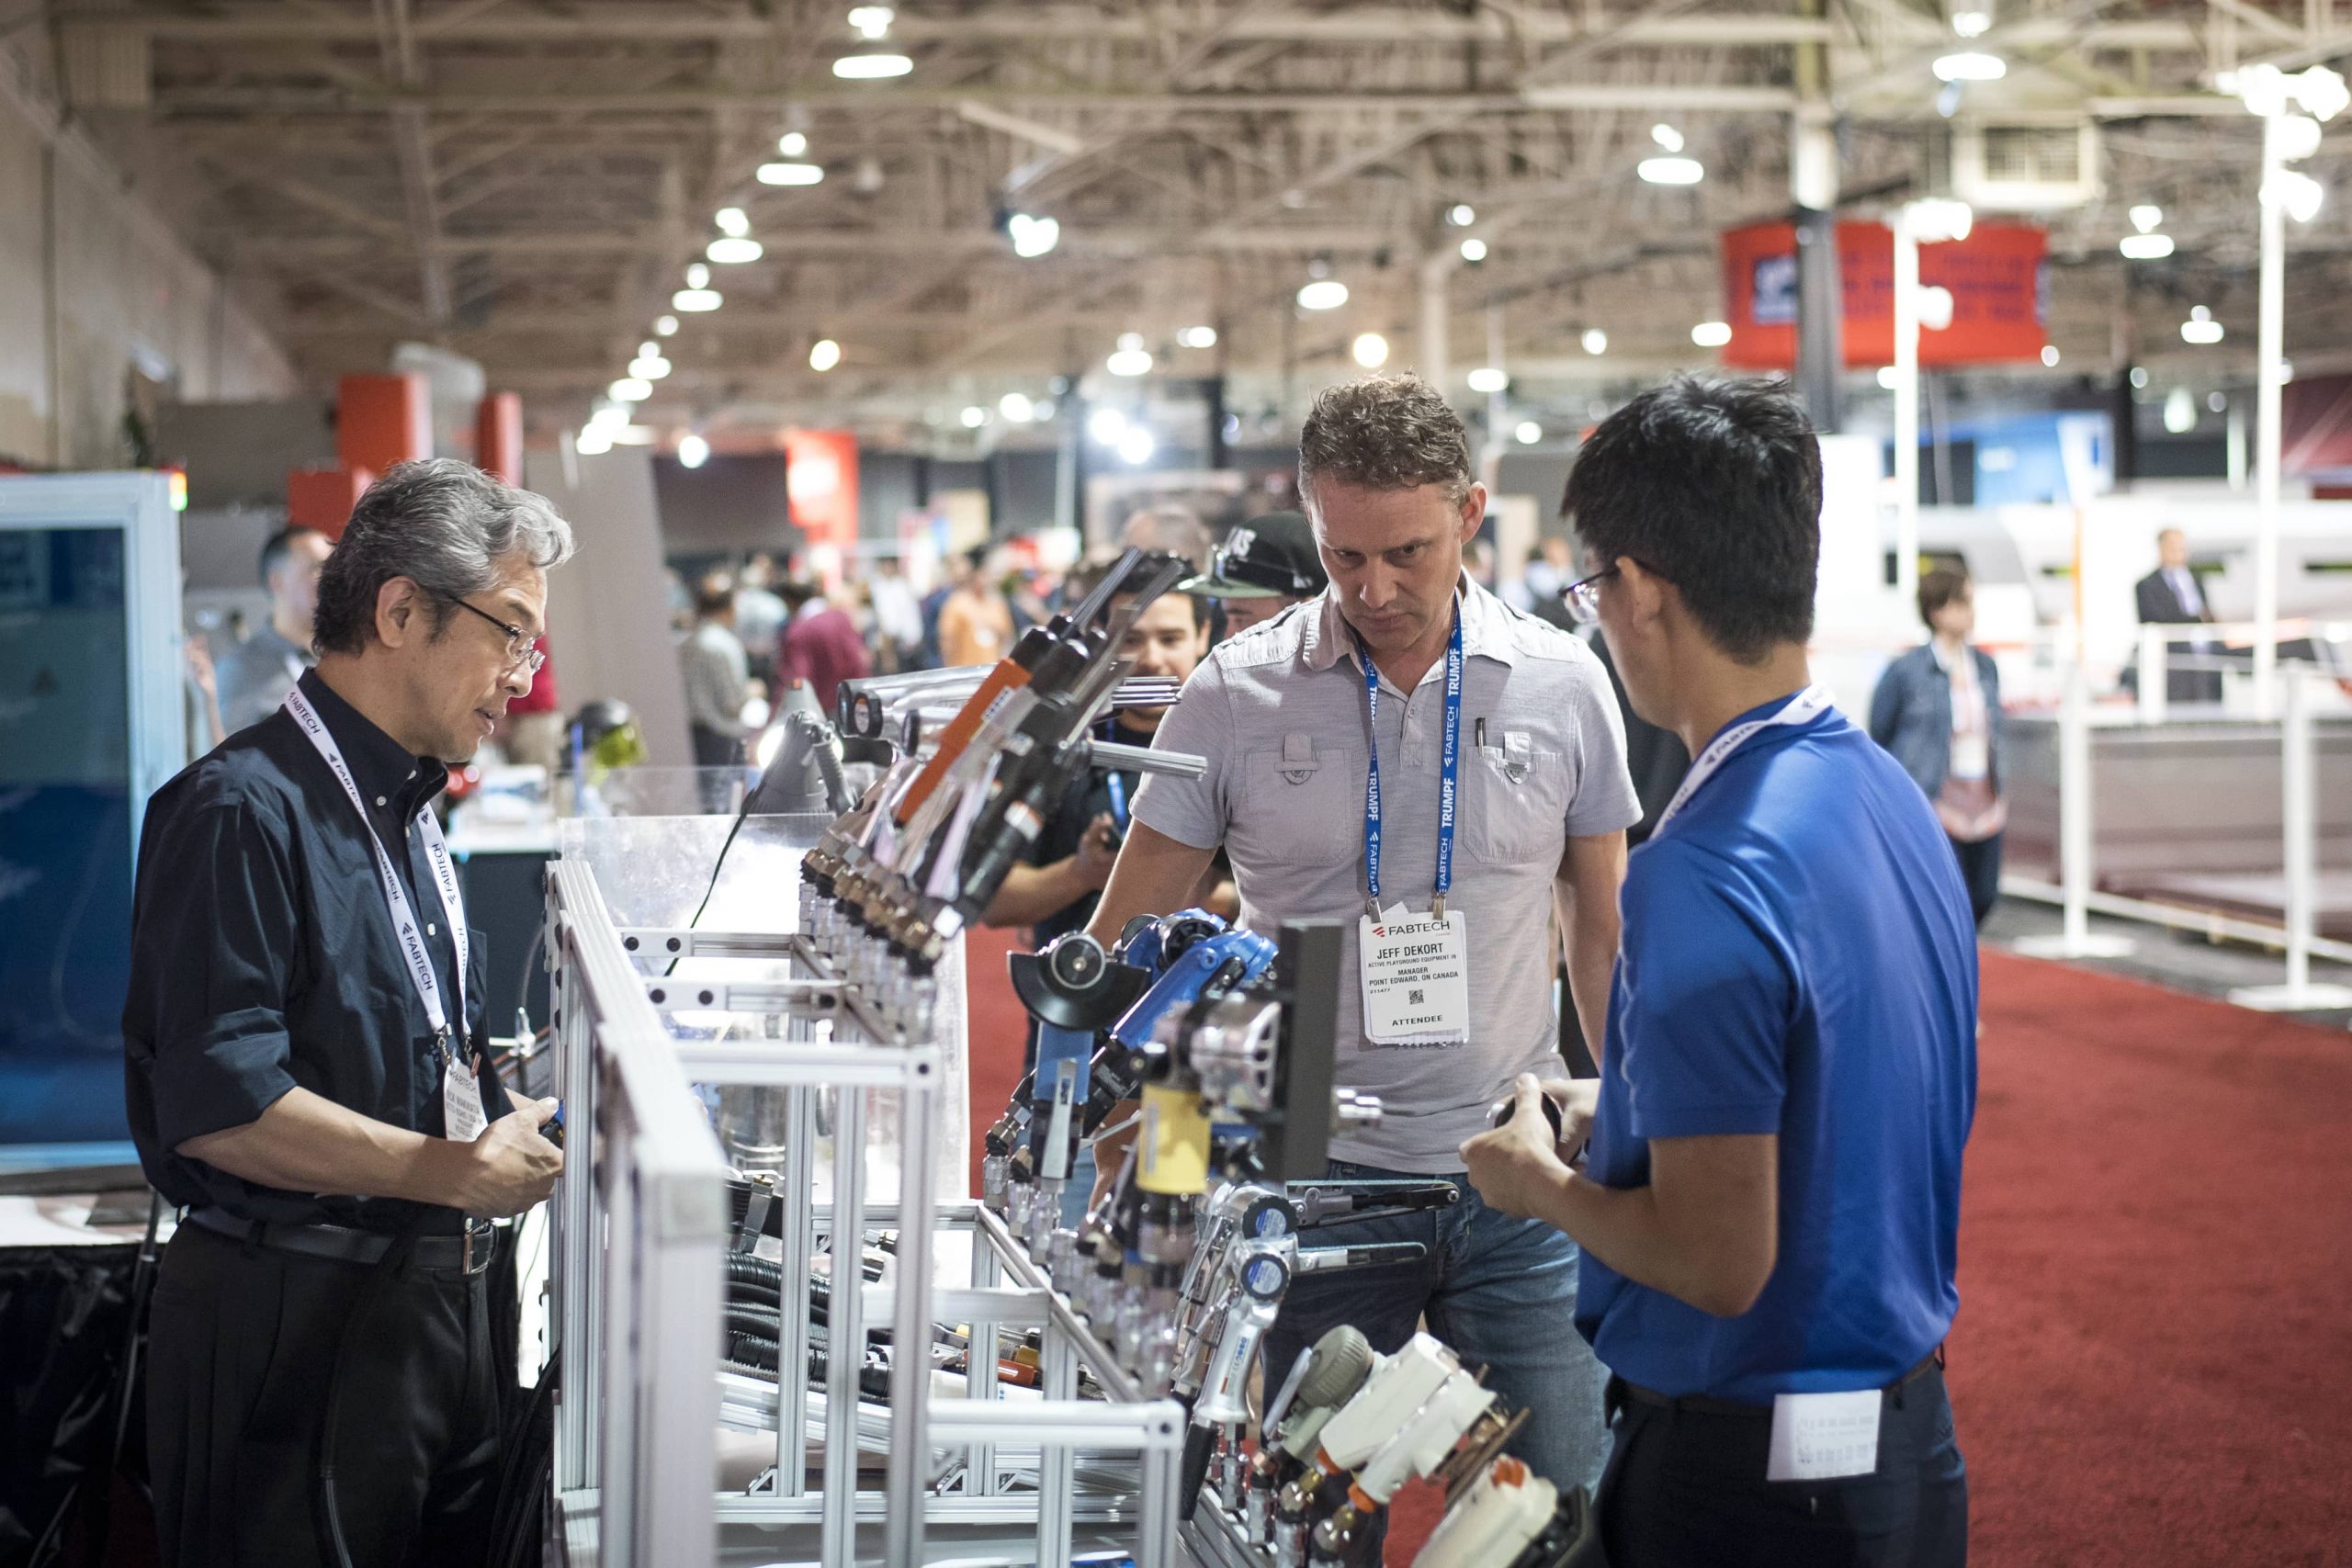 About FABTECH Canada